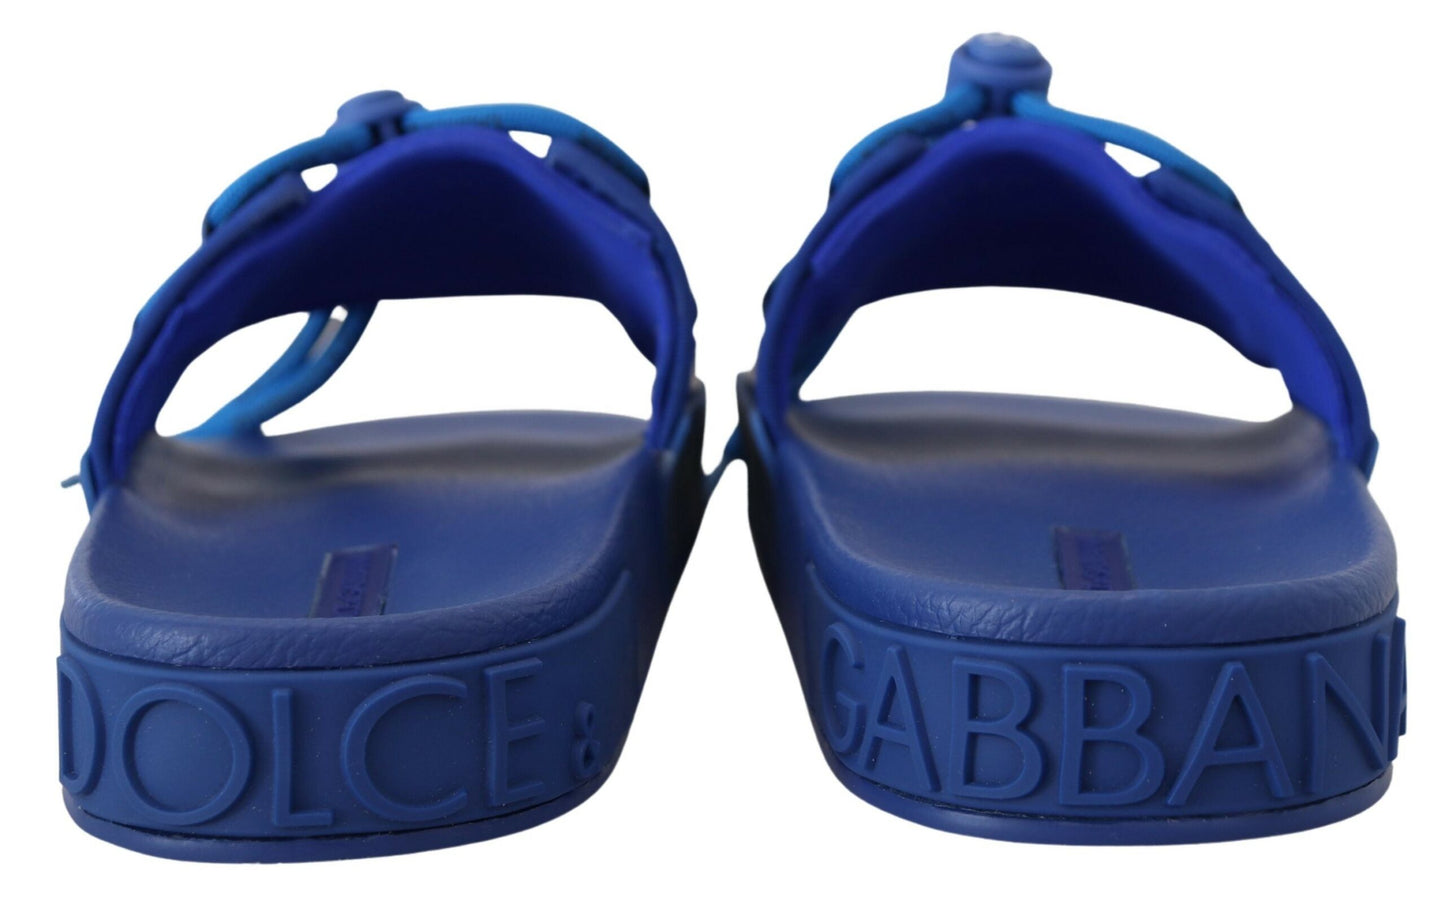 Dolce & Gabbana Men's Blue Stretch Rubber Sandals Slides Slip On Shoes - Designed by Dolce & Gabbana Available to Buy at a Discounted Price on Moon Behind The Hill Online Designer Discount St